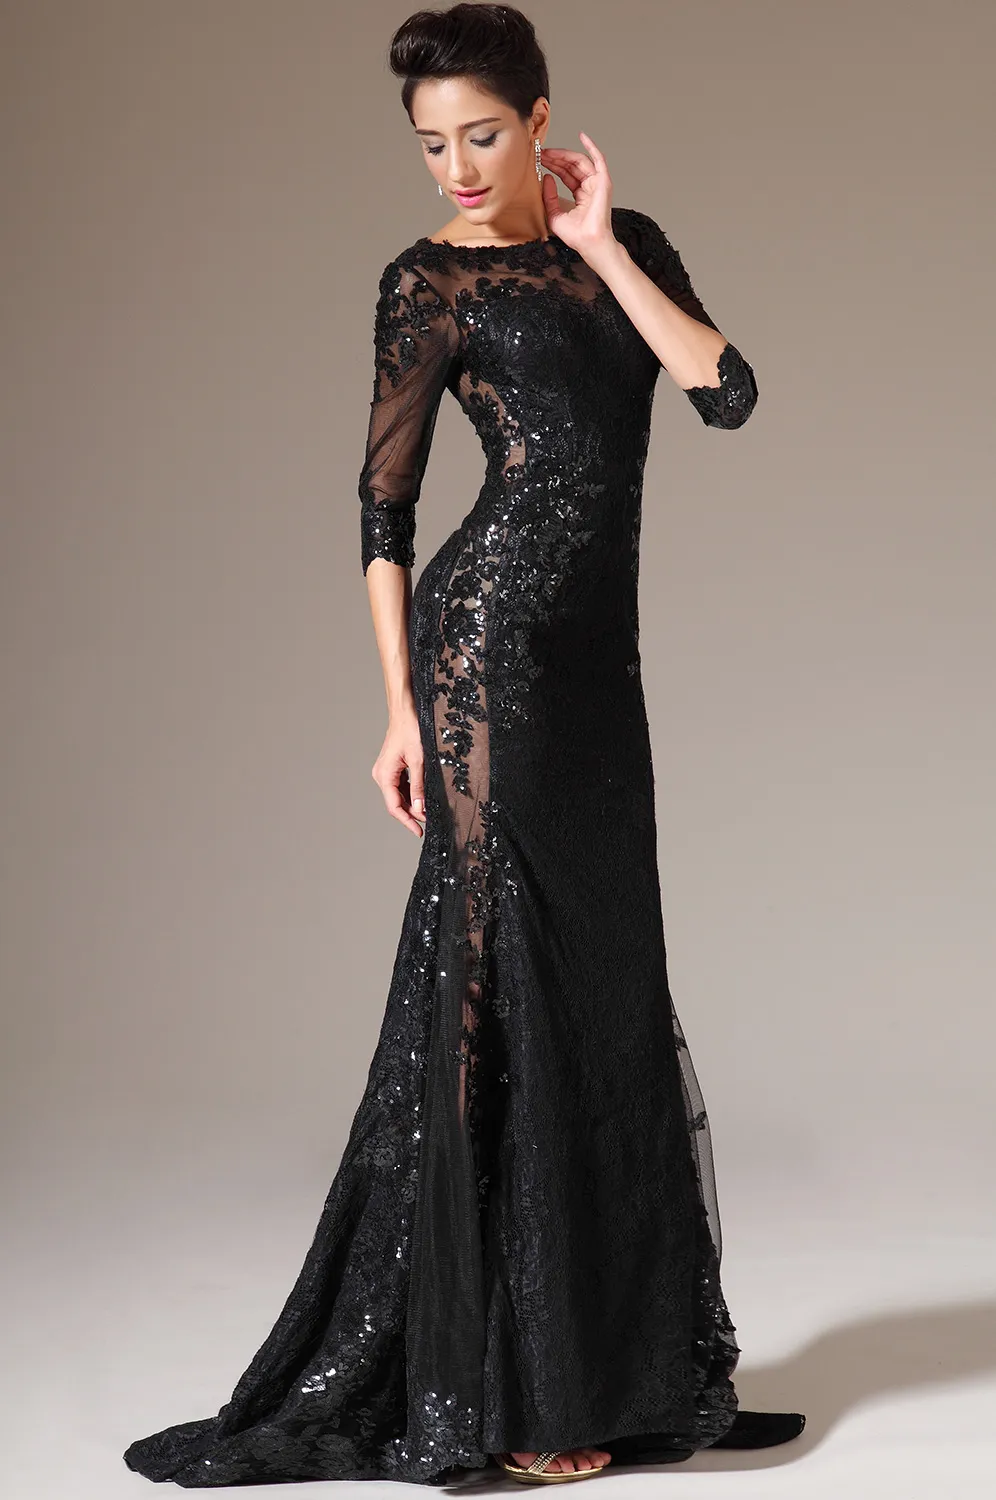 Newest Elegant Mermaid Jewel Black Lace Sweep Train Organza Evening Dresses With Long Sleeve See Through Cheap Long Mother Gowns8619930